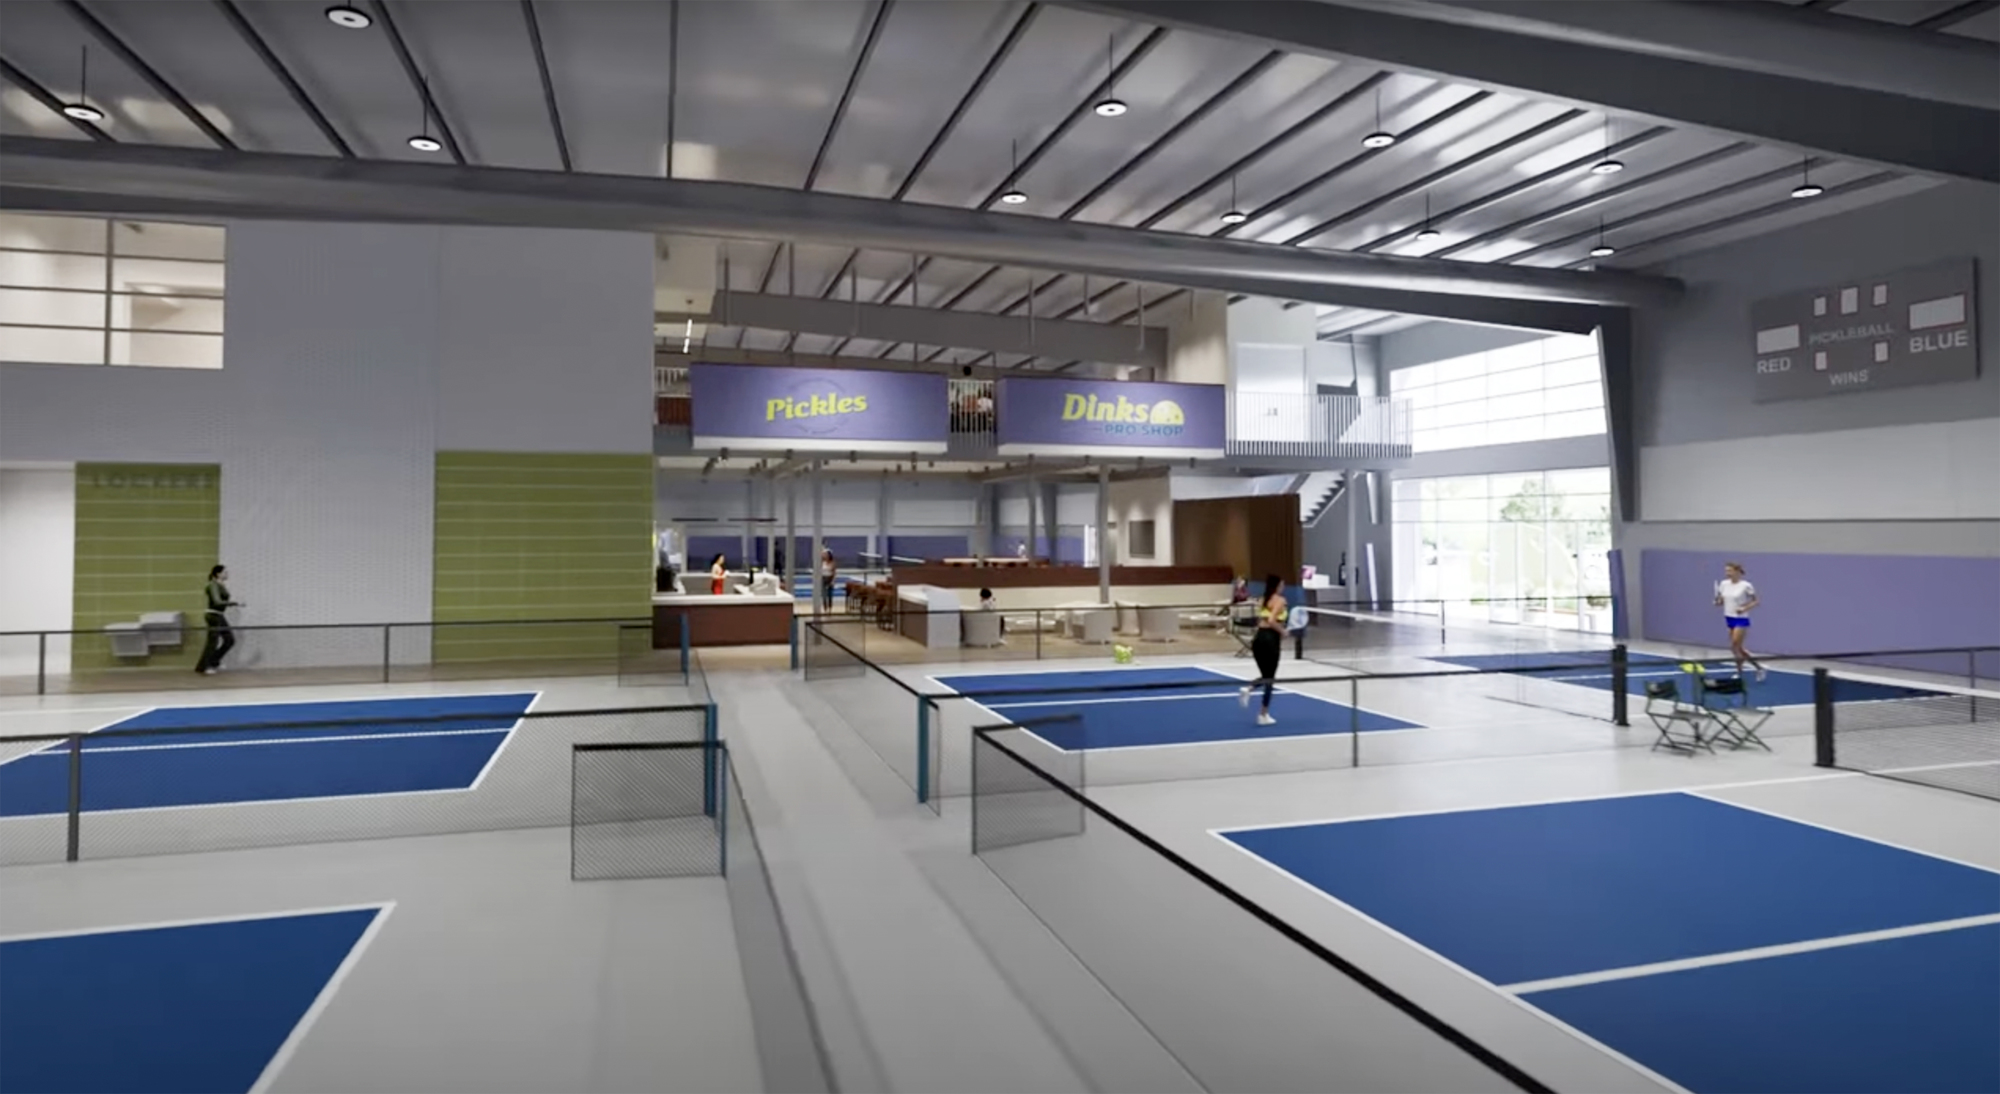 The Pickleball Club is expected to have 12 indoor courts and four outdoor courts, plus a pro shop, a small cafe and other amenities. Renderings show what it will look like. (Courtesy photo)